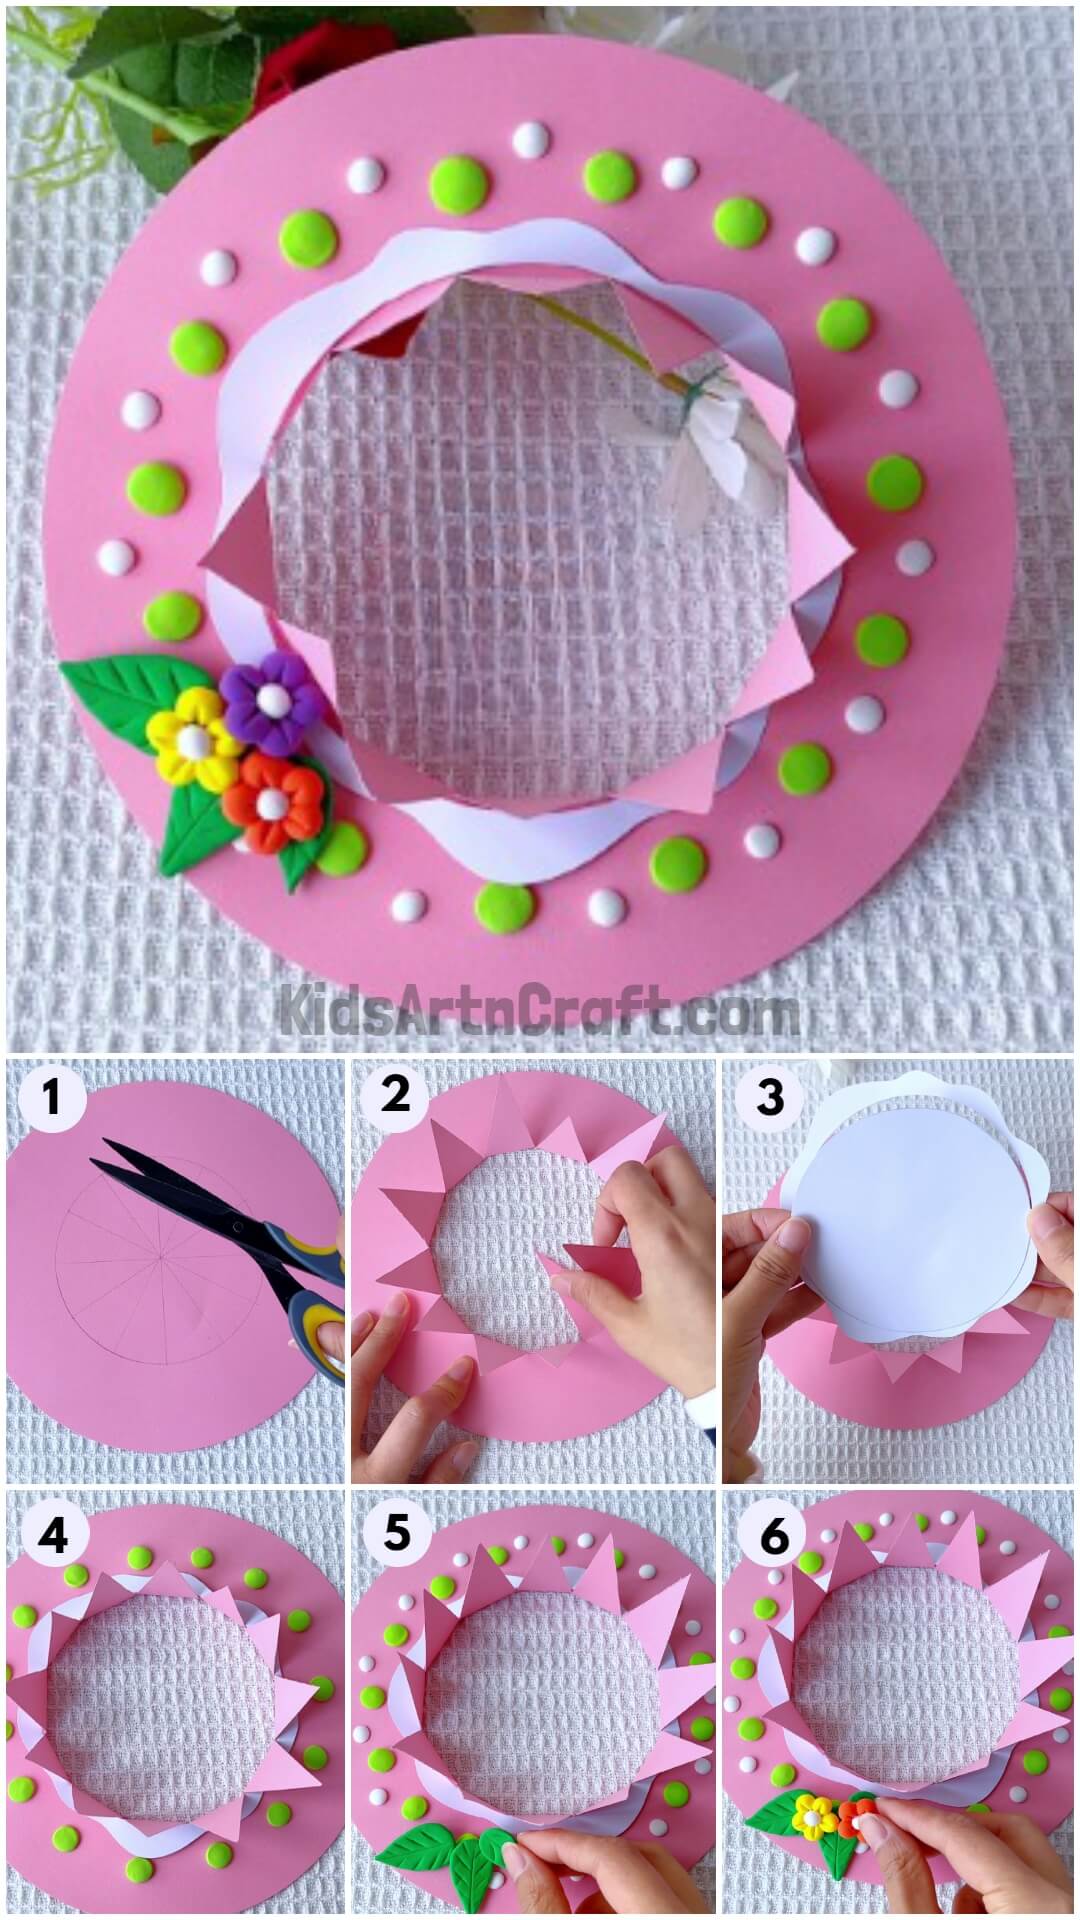 How to Make A Summer Hat Using Paper and Clay For Kids Tutorial